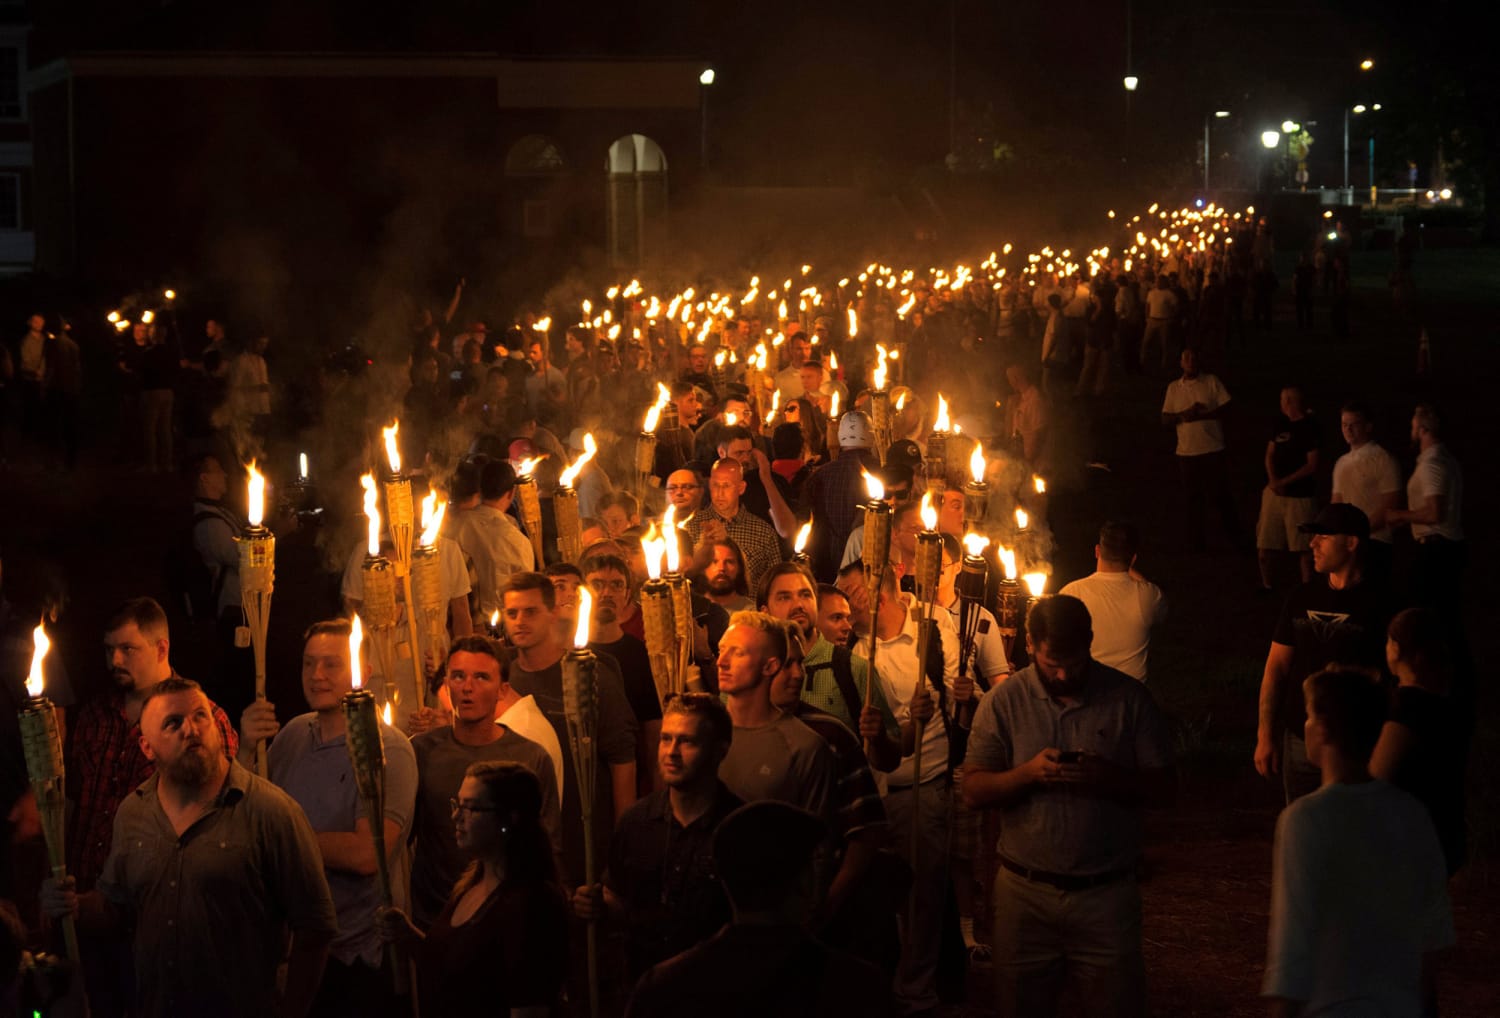 Civil trial opens in deadly ‘Unite the Right’ rally